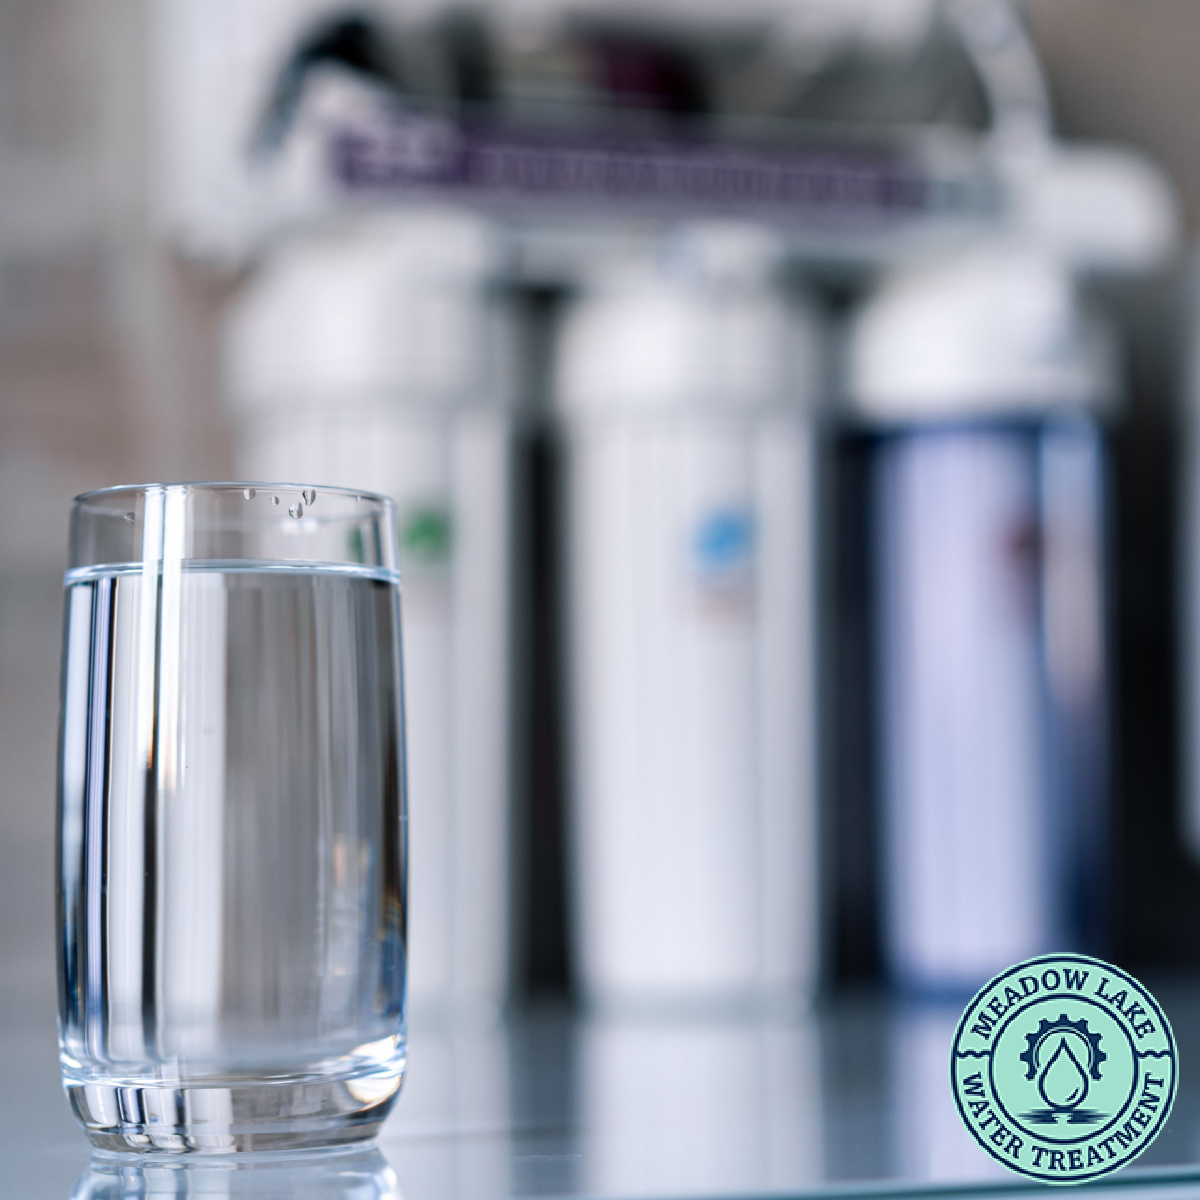 Meadow Lake Water Treatment—When You Need Water Testing & Treatment Services in Gold Bar